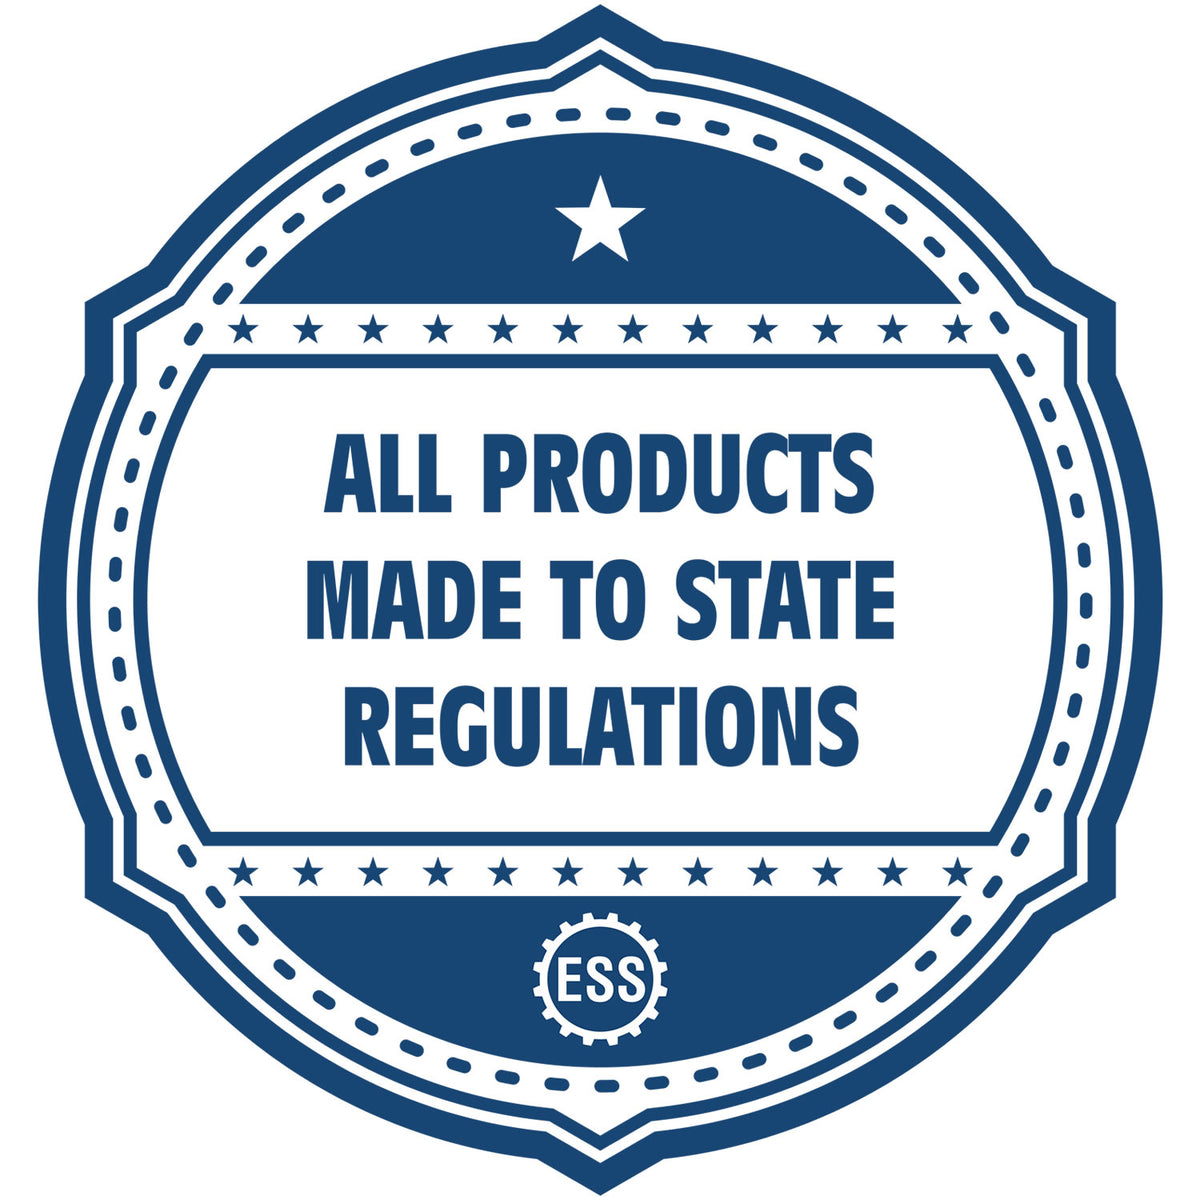 An icon or badge element for the Soft Pocket Texas Landscape Architect Embosser showing that this product is made in compliance with state regulations.